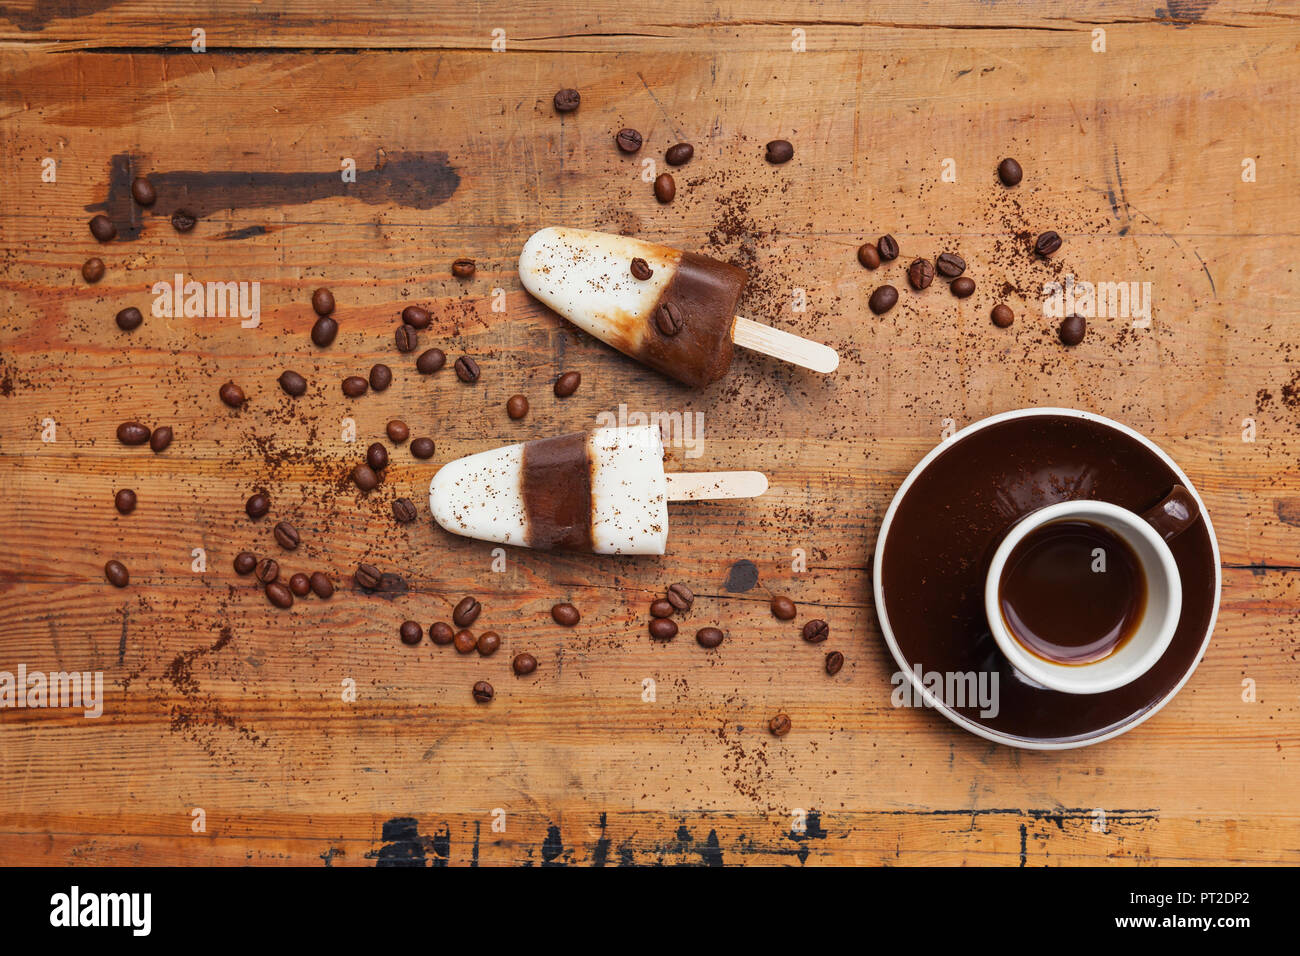 Homemade Espresso Macchiato ice lollies with cup of Espresso and coffee beans on wooden background Stock Photo